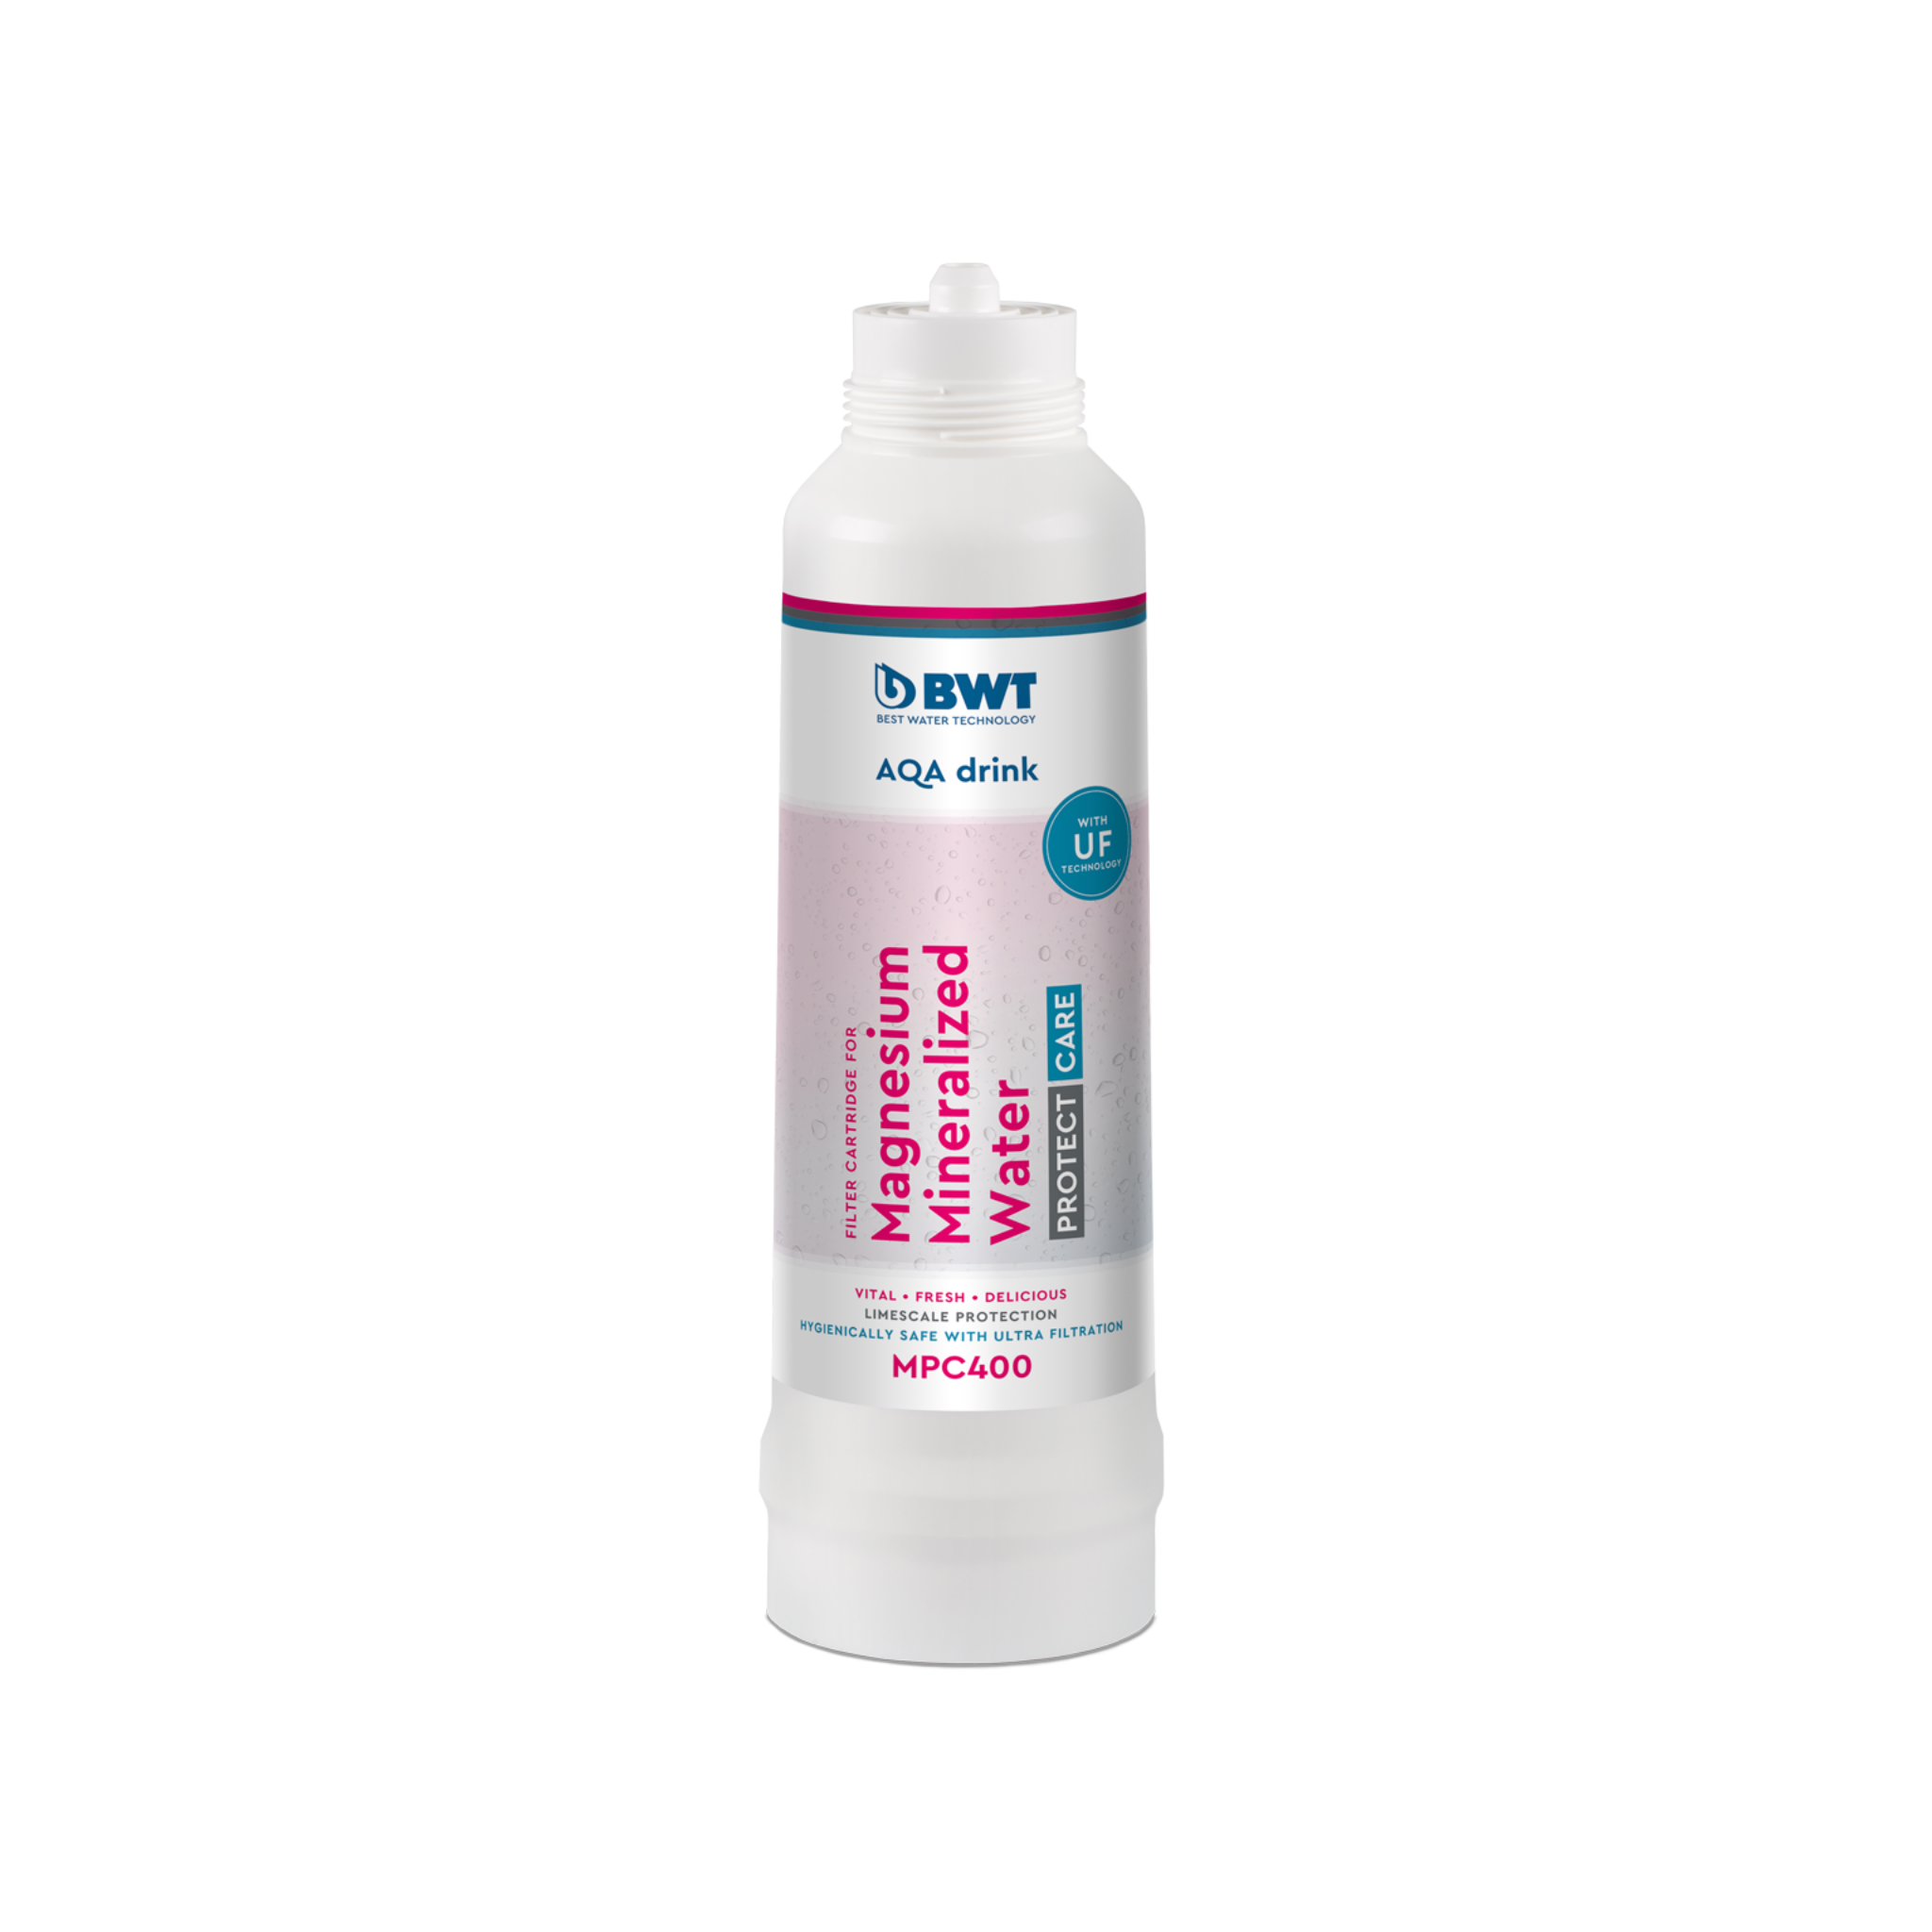 BWT AQA drink Pure 2.0 | 125560433 + MPC400 filter | limescale protection; removes 99.99% of bacteria and microplastics plus mineralizes your water with valuable mineral magnesium